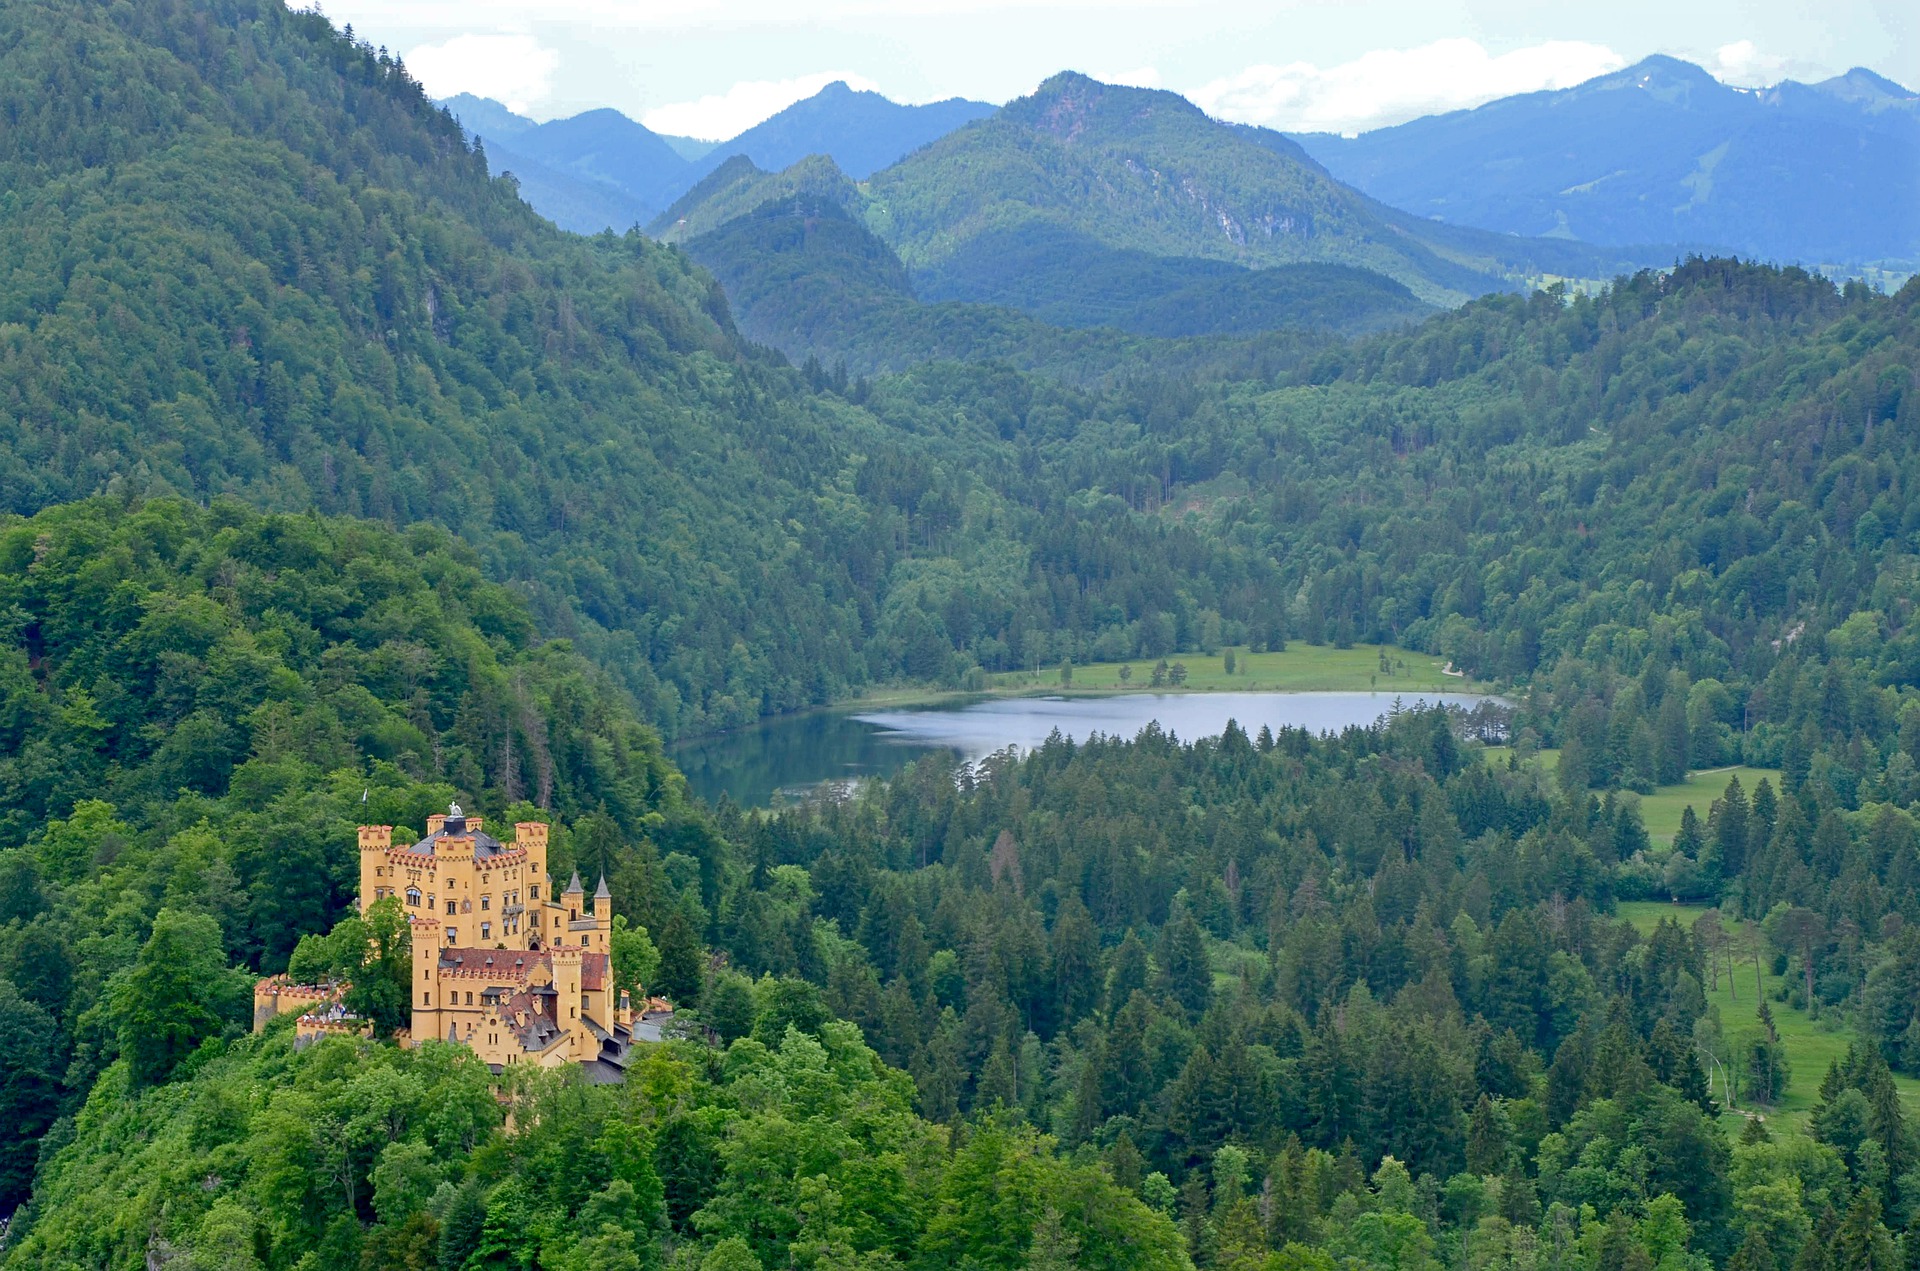 One of the most beautiful castles in Germany that is surrounded by forests, hills and a lake